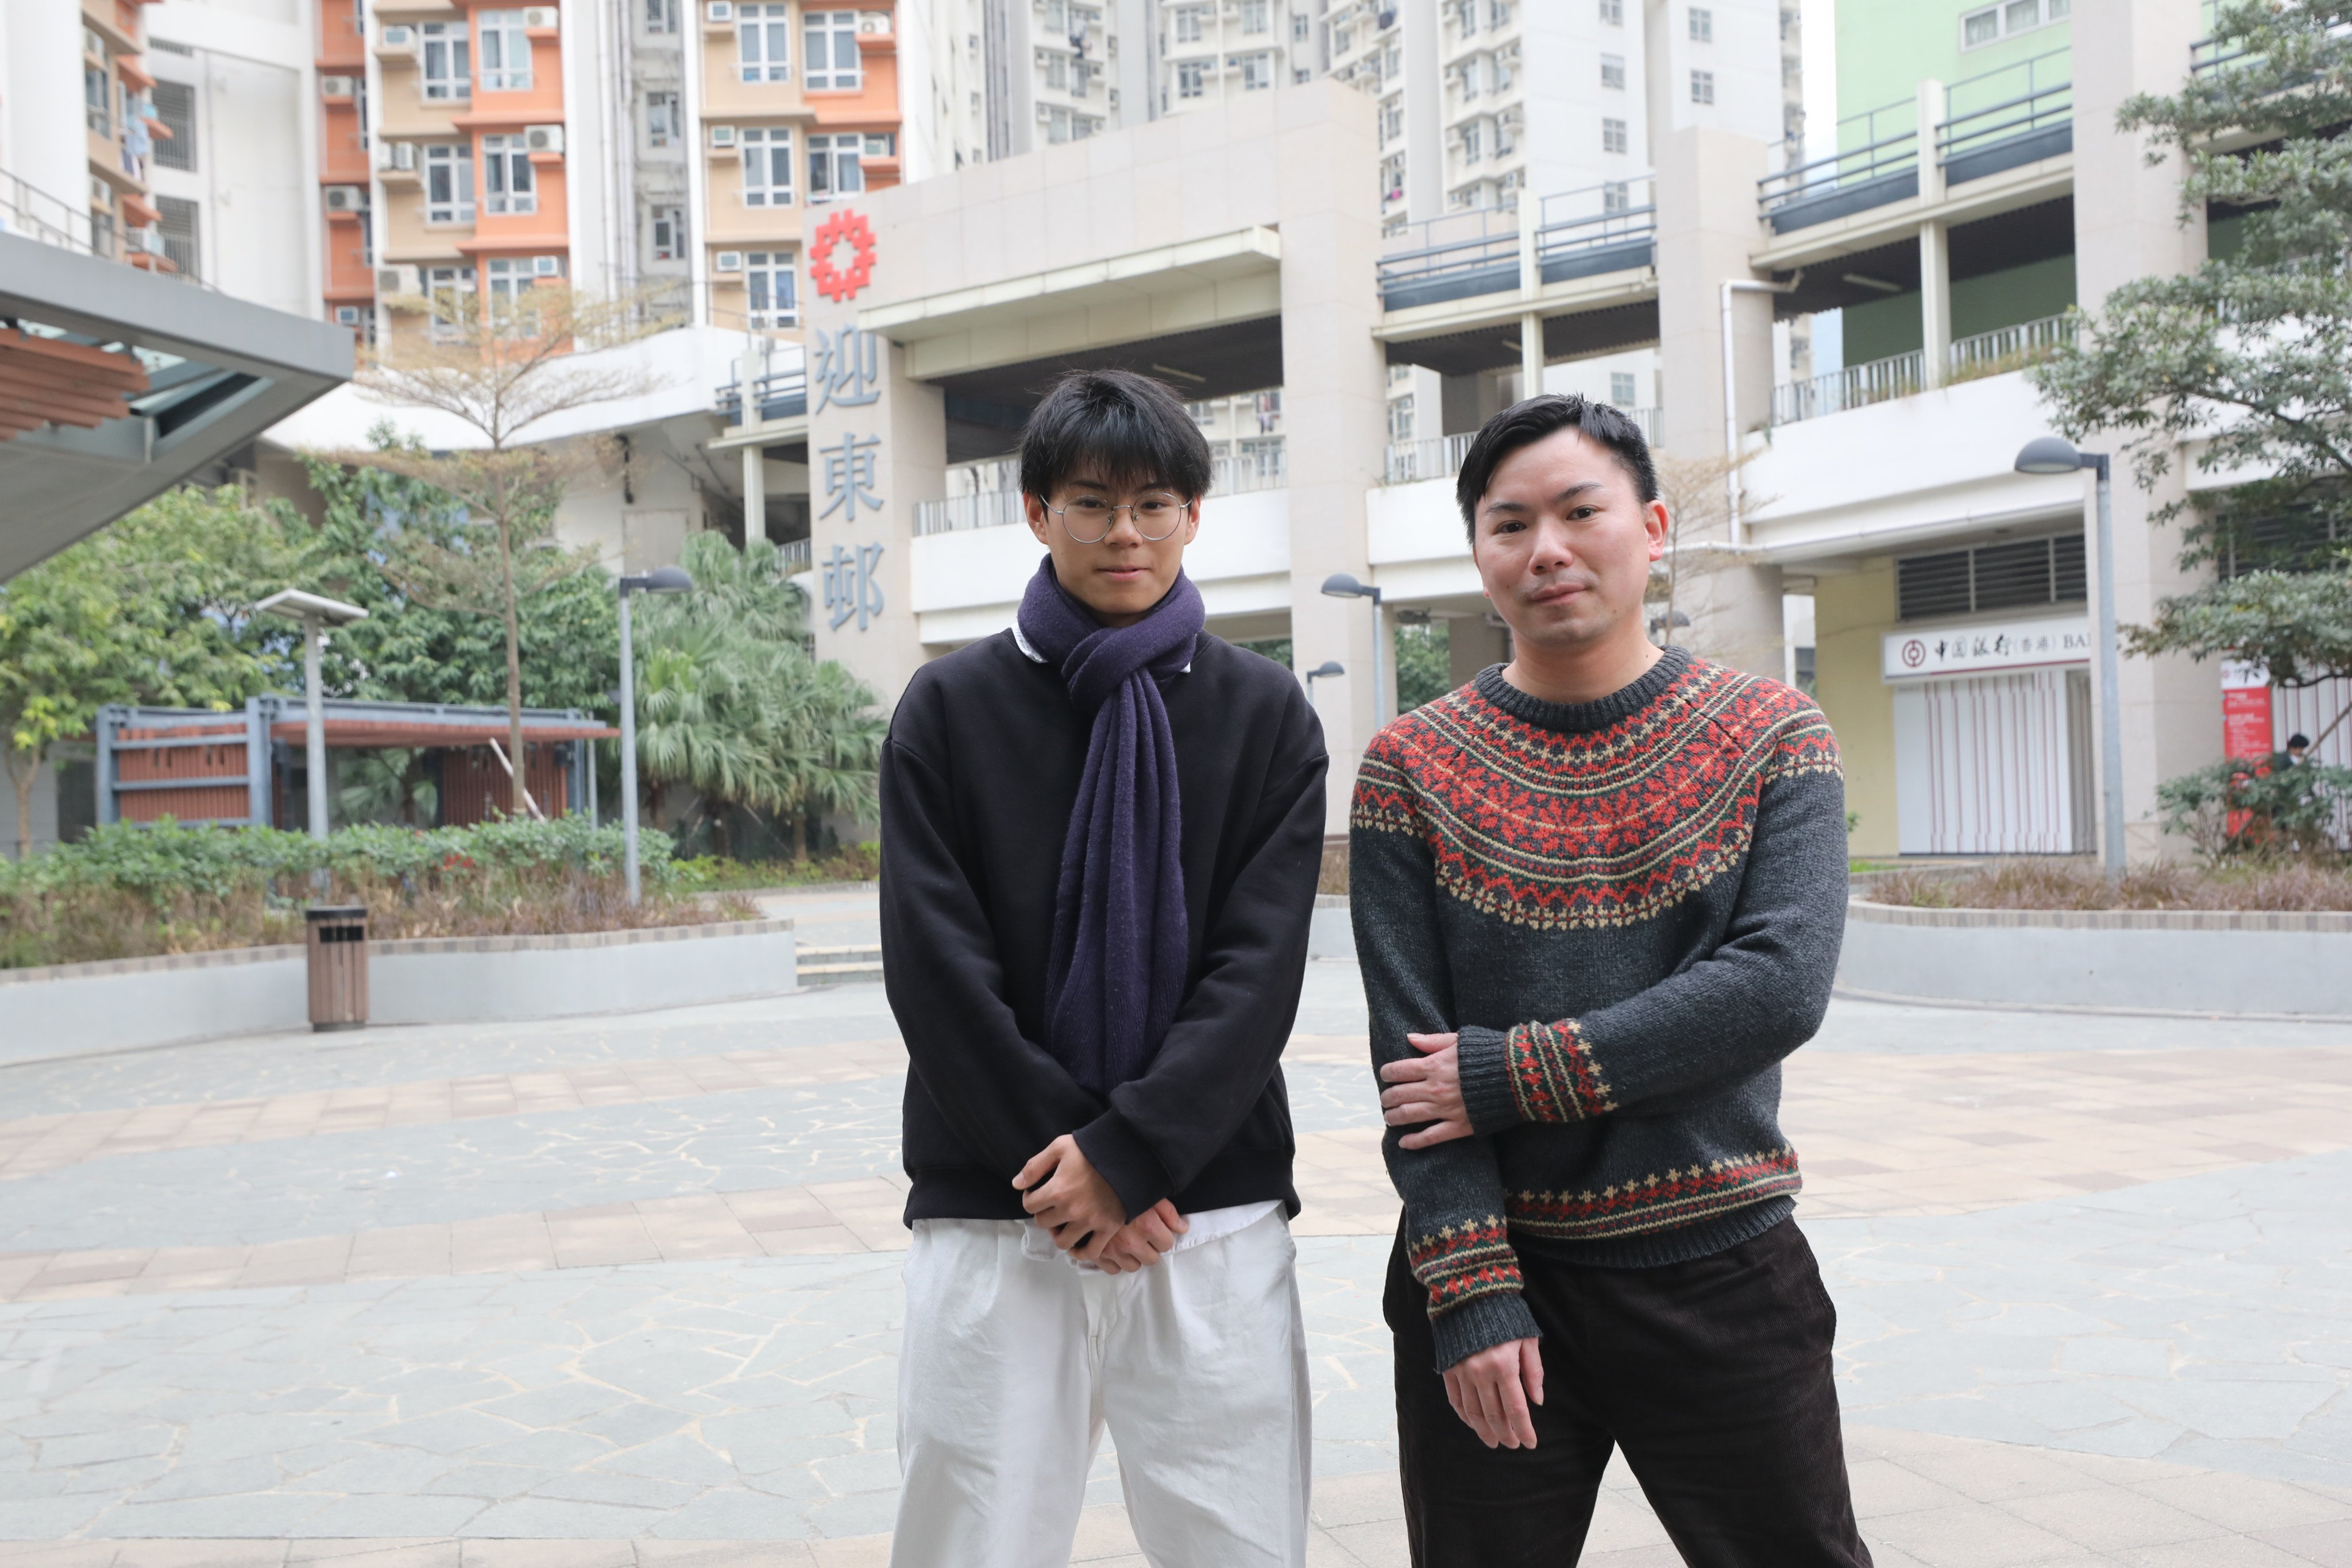 Daniel Zheng Yui-hei (left) and Ray Choi Po-wing are bringing people together at Ying Tung Estate in Tung Chung. Photo: Xiaomei Chen